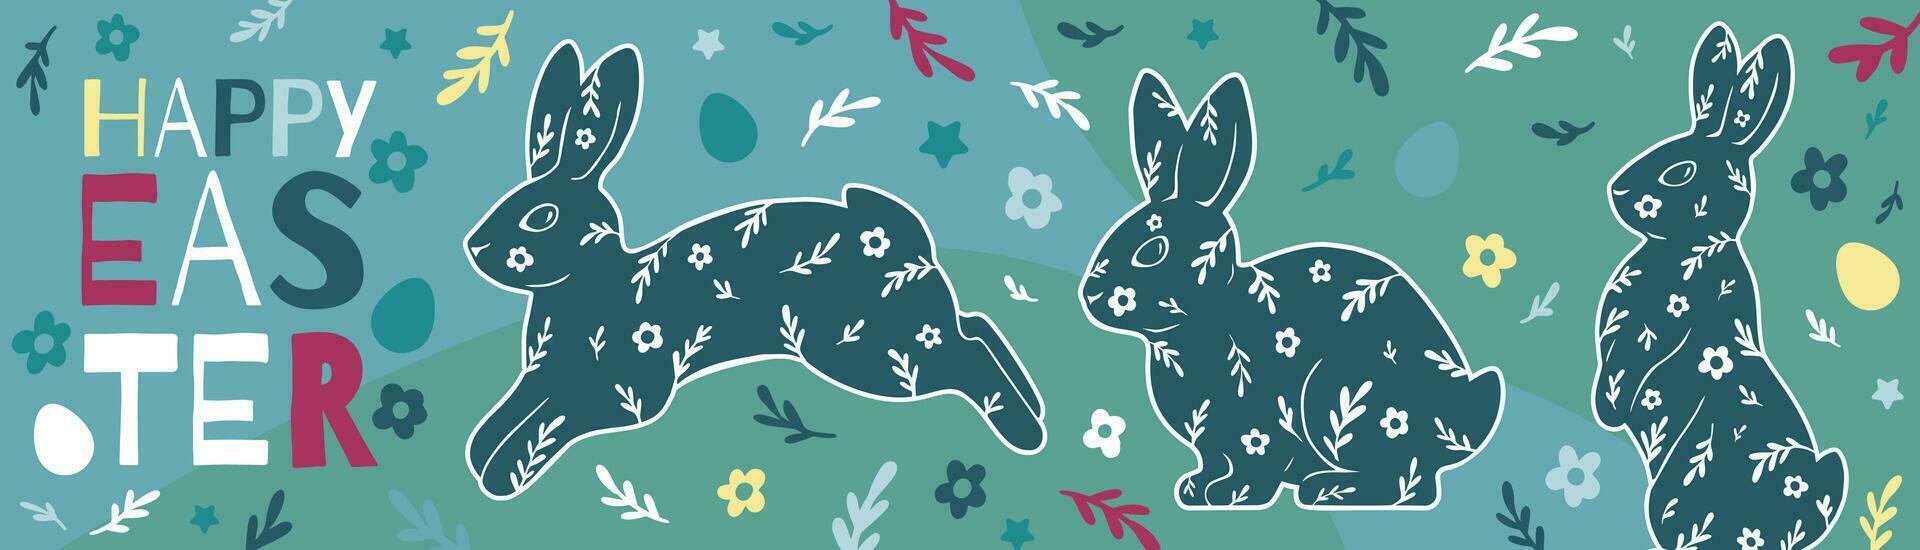 Happy Easter long horizontal banner with bunnies, eggs, flowers, and text. Beautiful bright modern vector illustration.